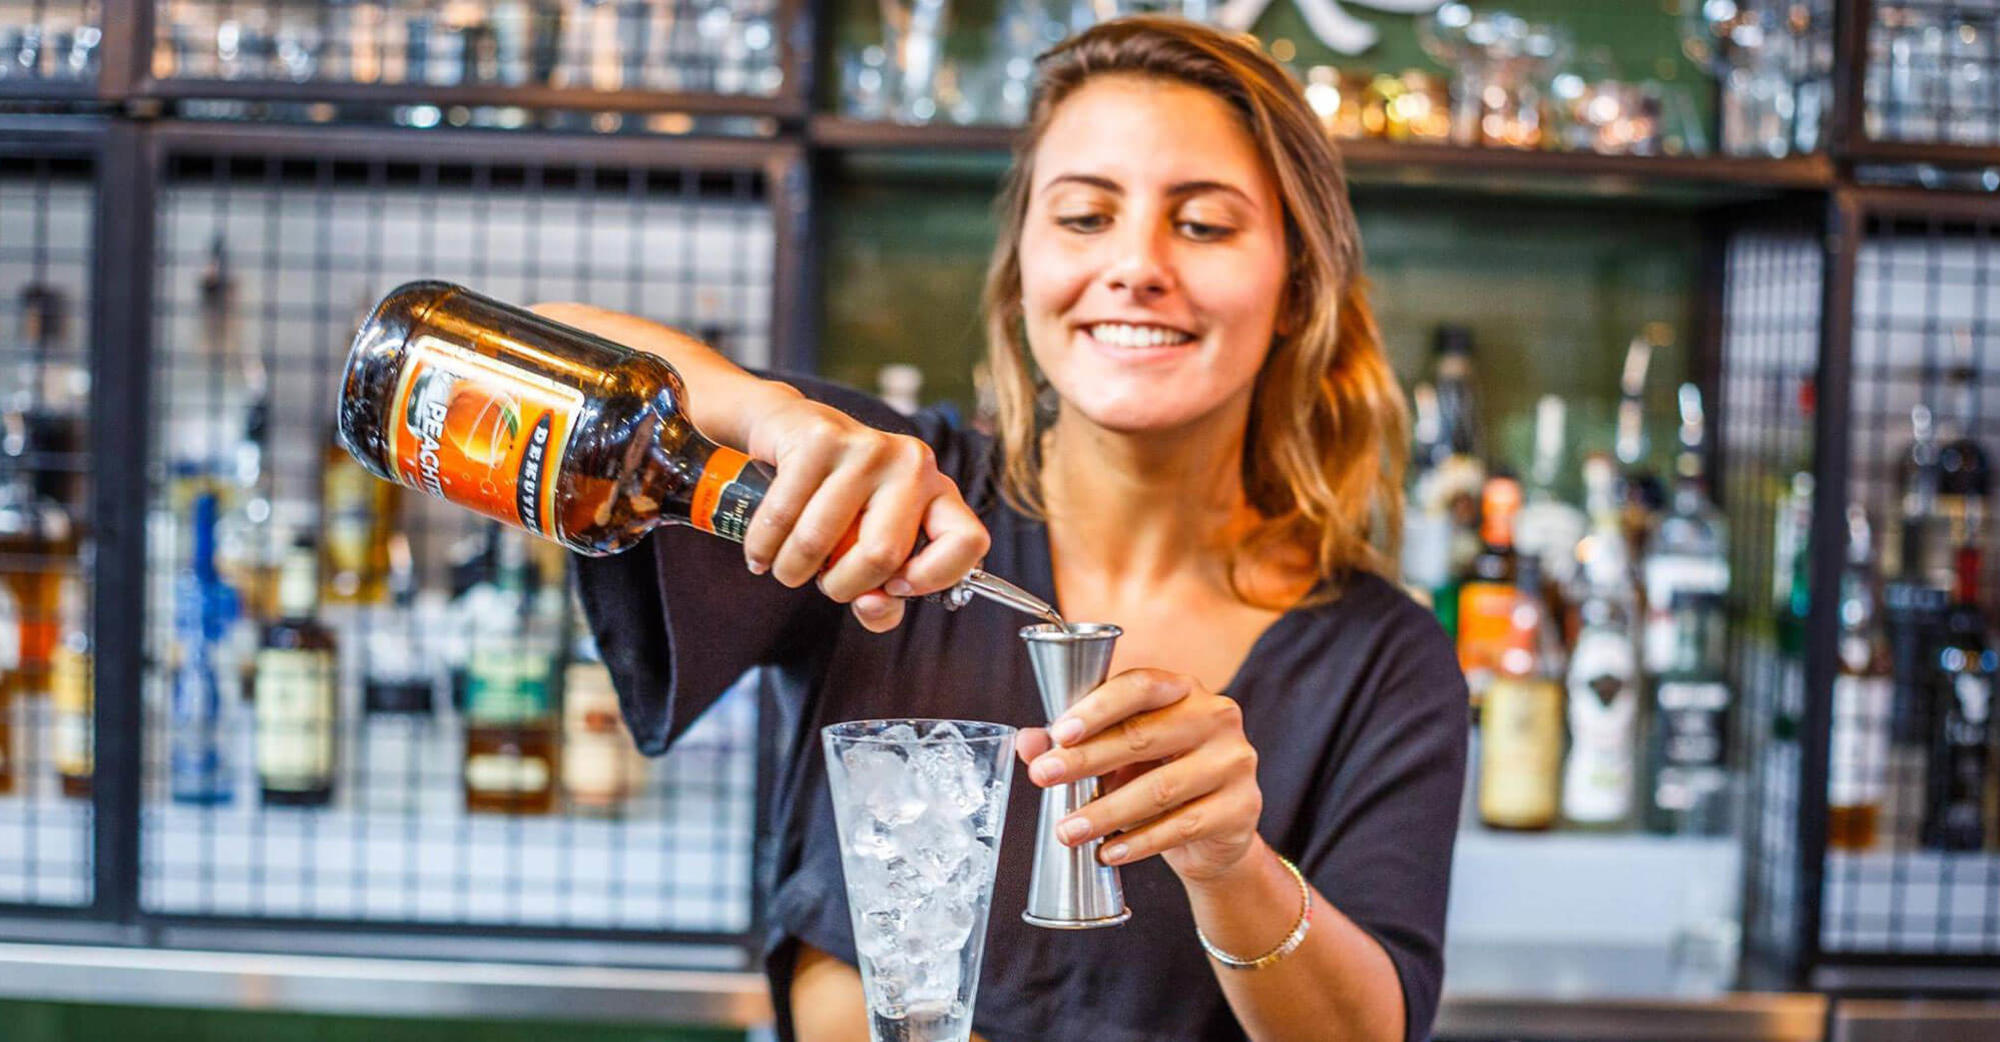 Handpicked: The 8 Best Bar Jiggers, According to Drinks Pros